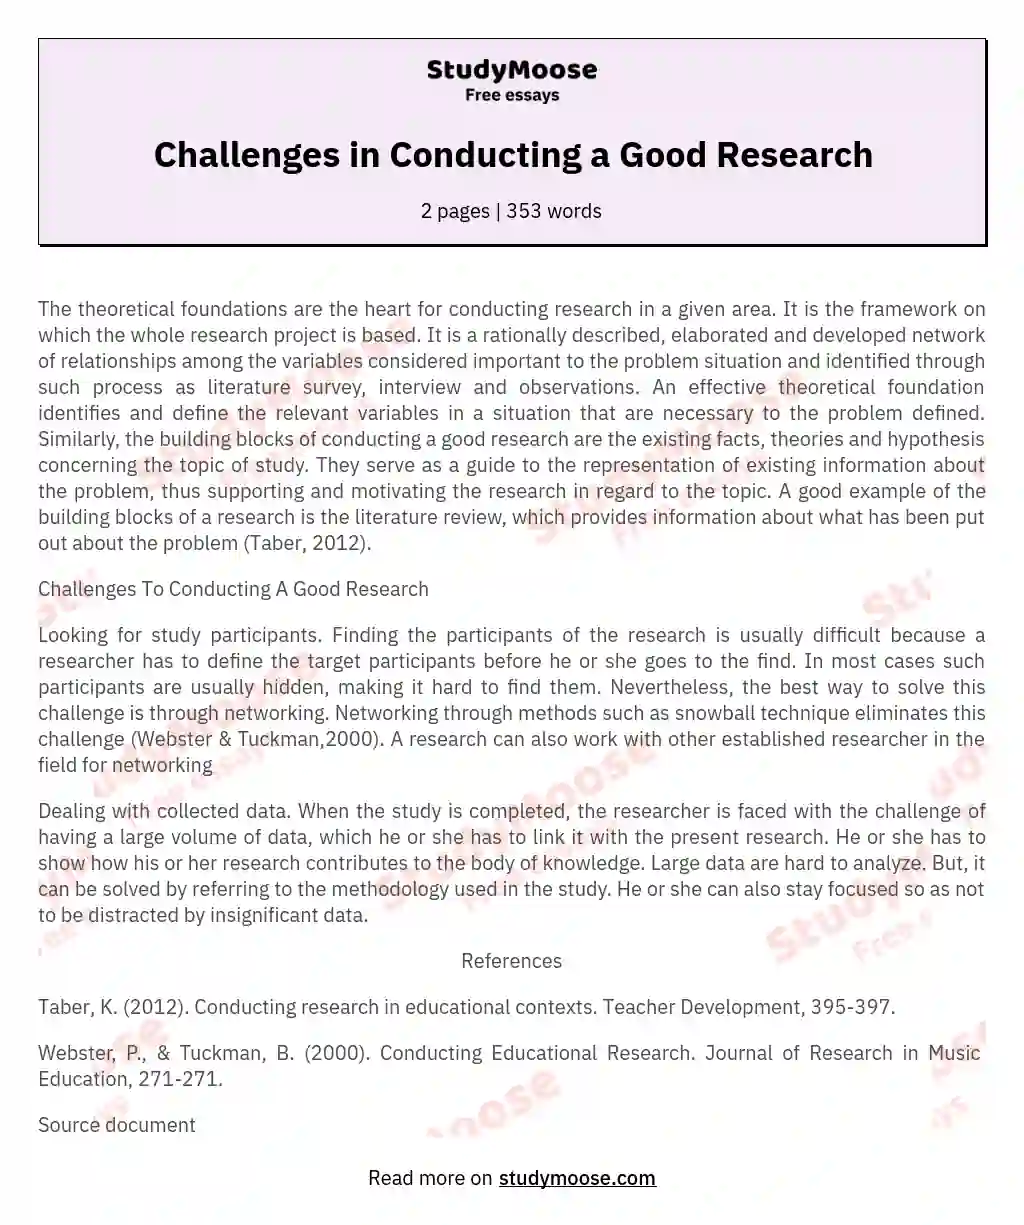 Challenges in Conducting a Good Research